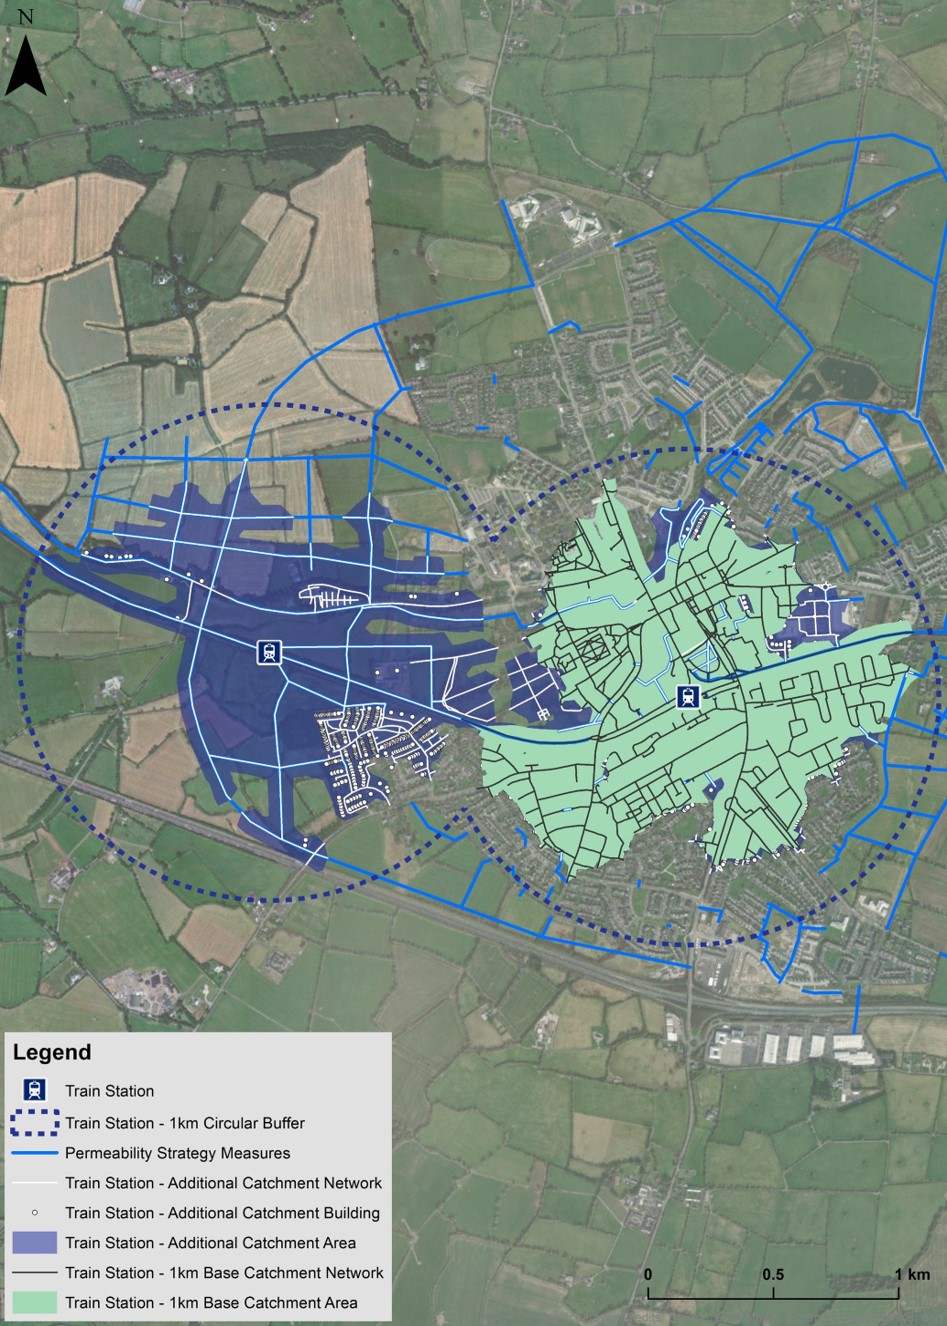 Maynooth & Environs Area Based Transport Assessment (MEABTA)